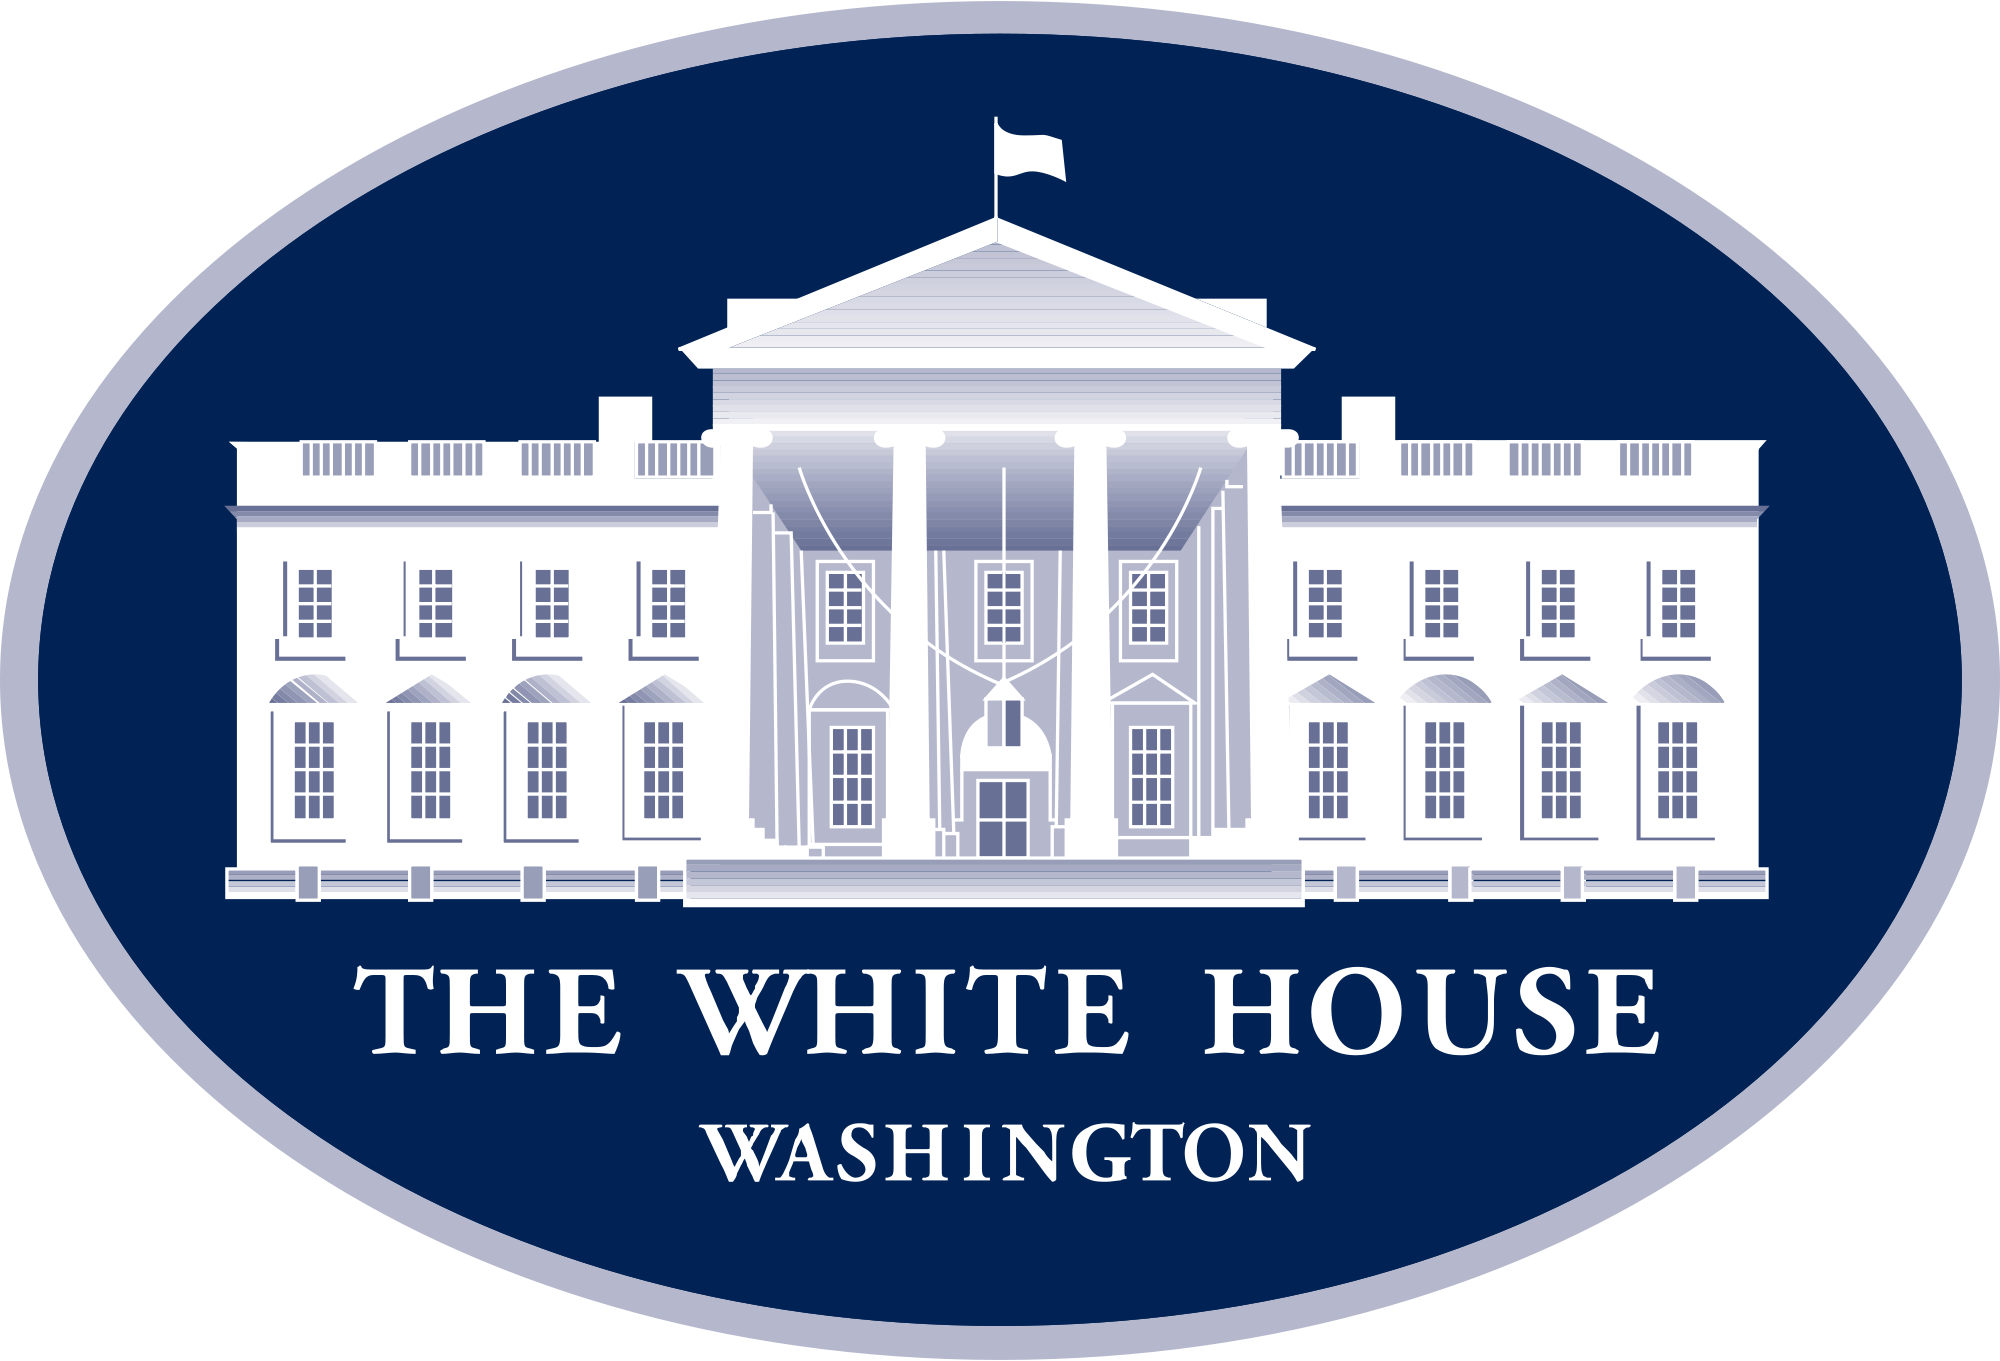 macintosh hd:users:beccamac:dropbox:center on poverty:cte-stem conference:whitehouse_logo.png